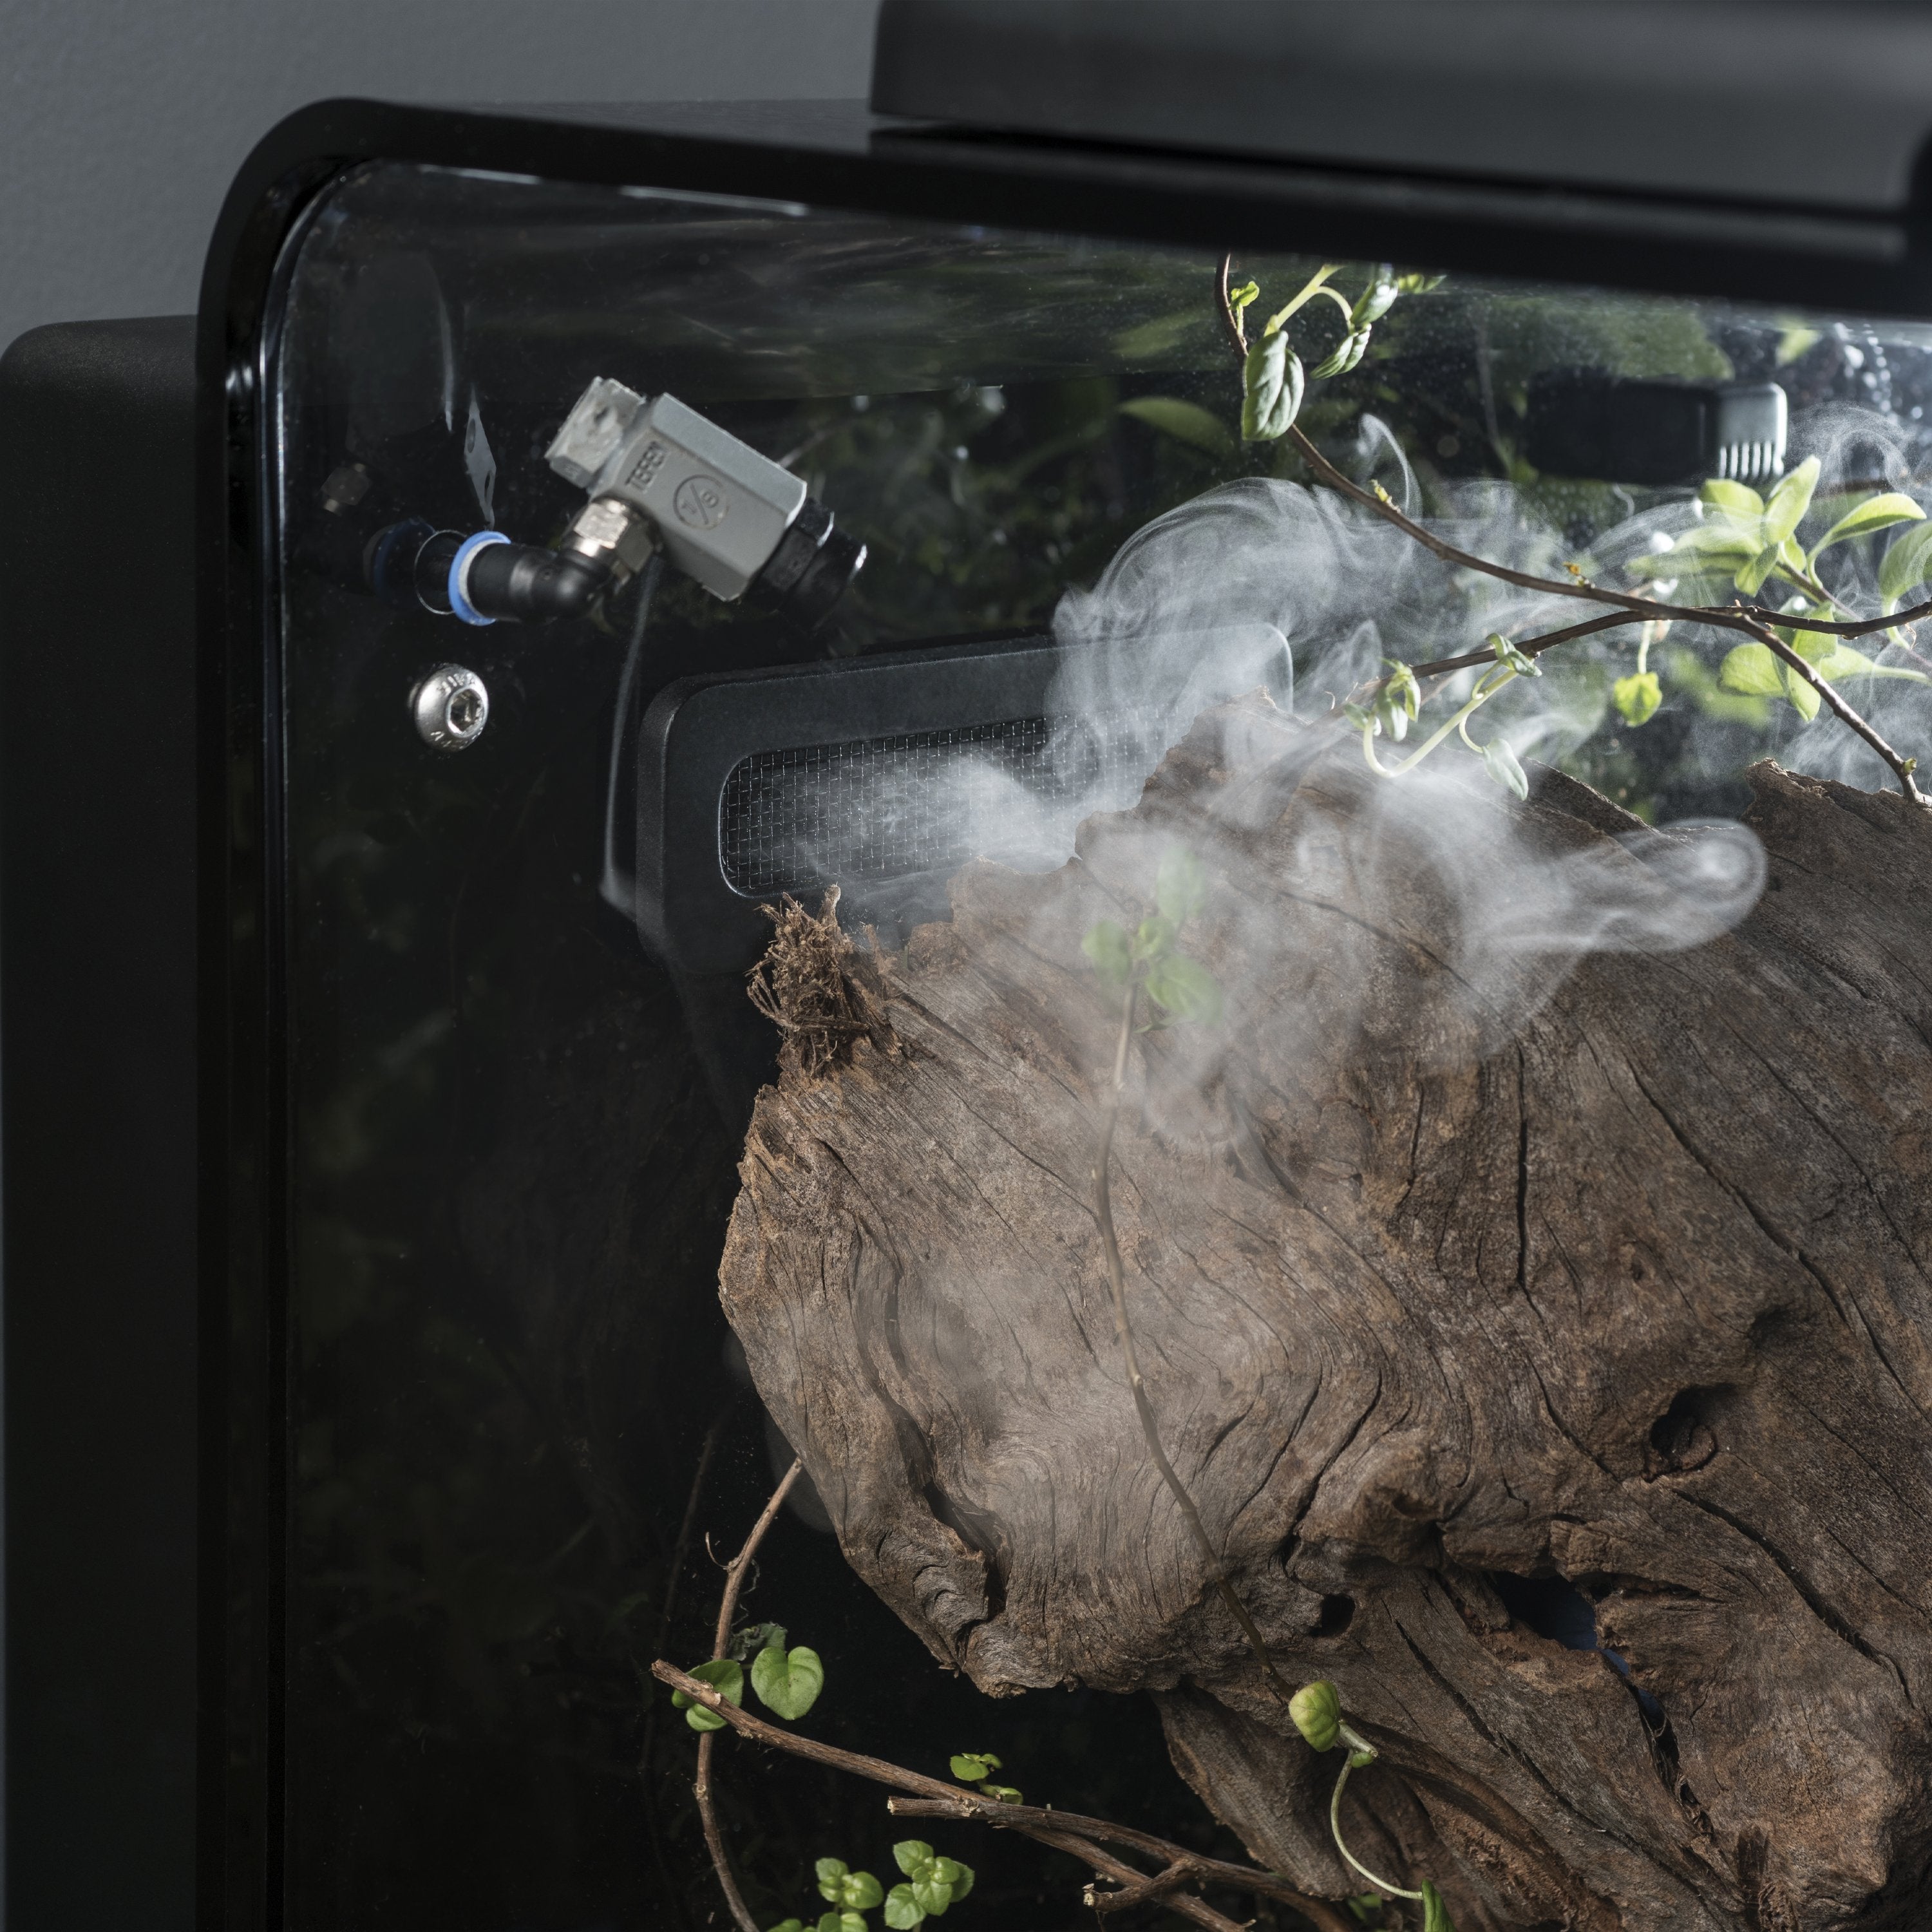 EARTH Vivarium features Humidity Monitoring and Control